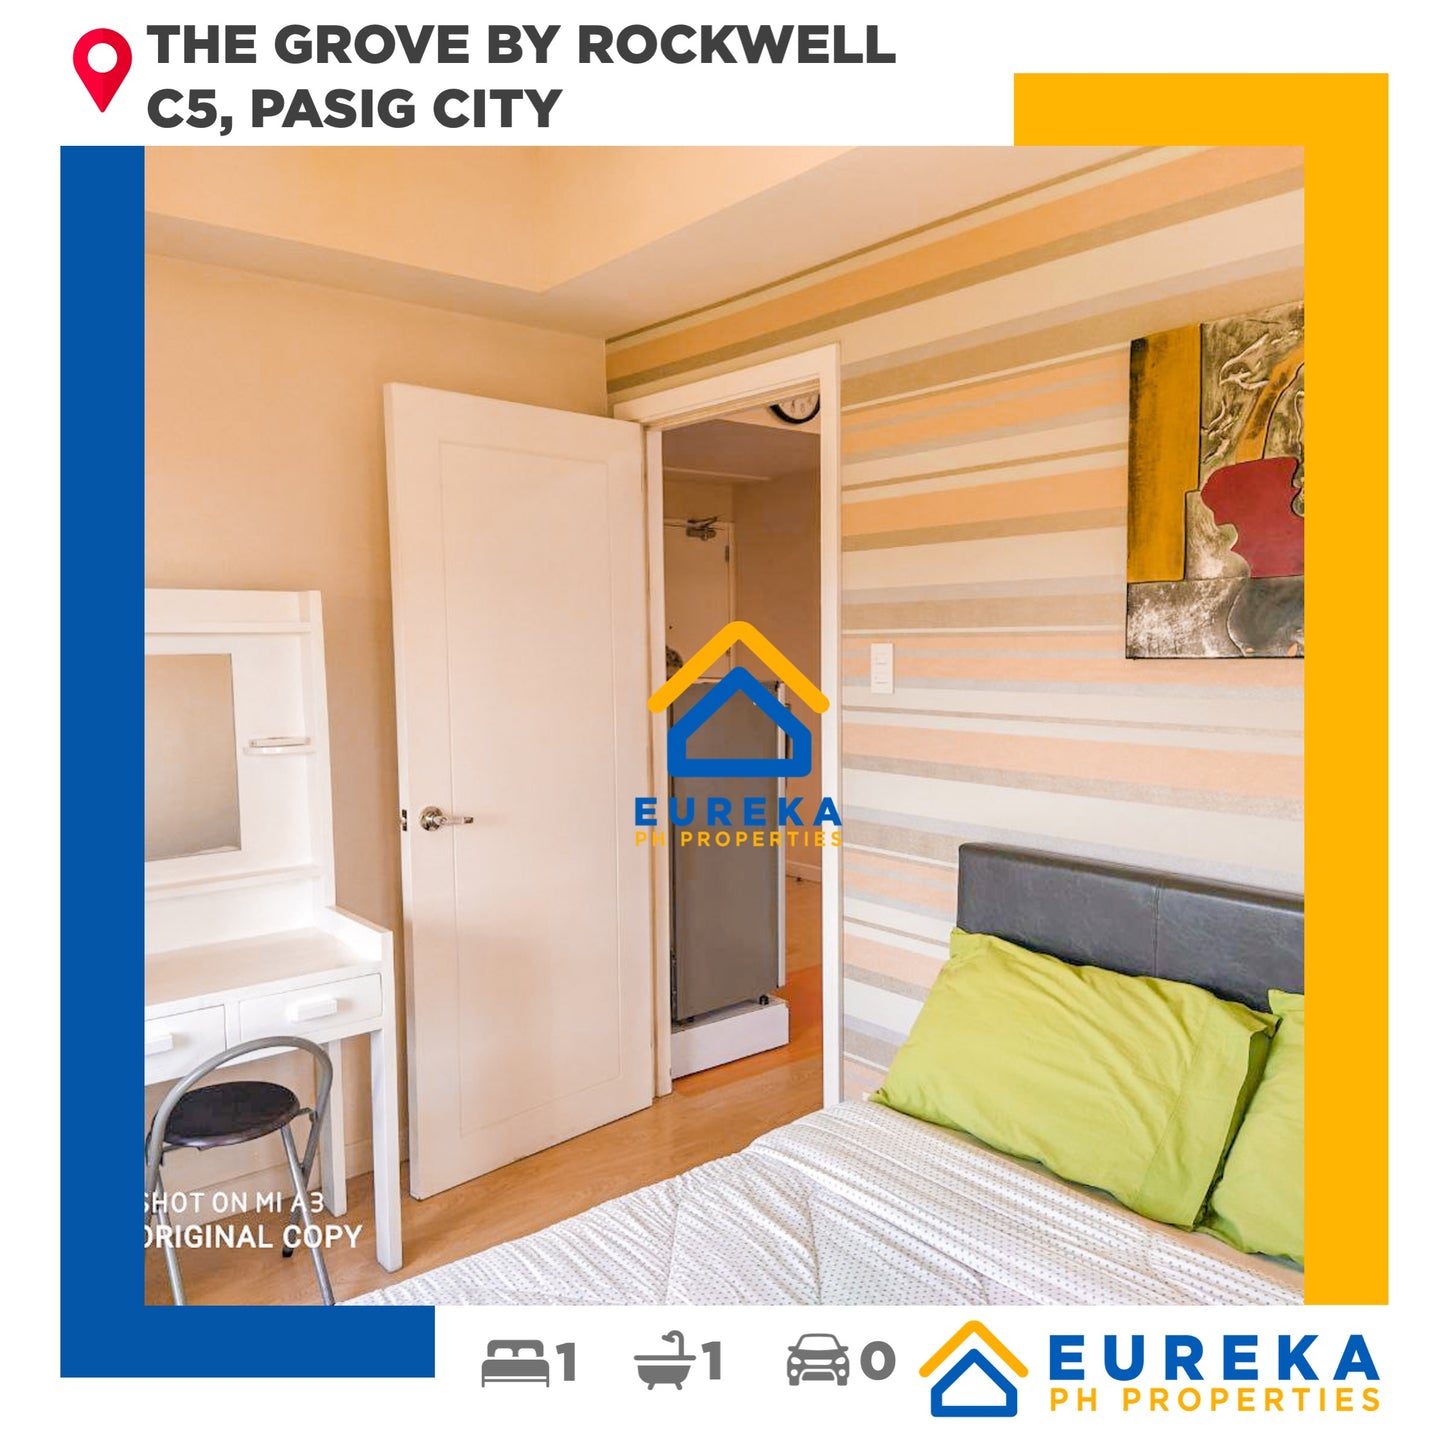 43 sqm 1BR unit without parking at the Grove by Rockwell.